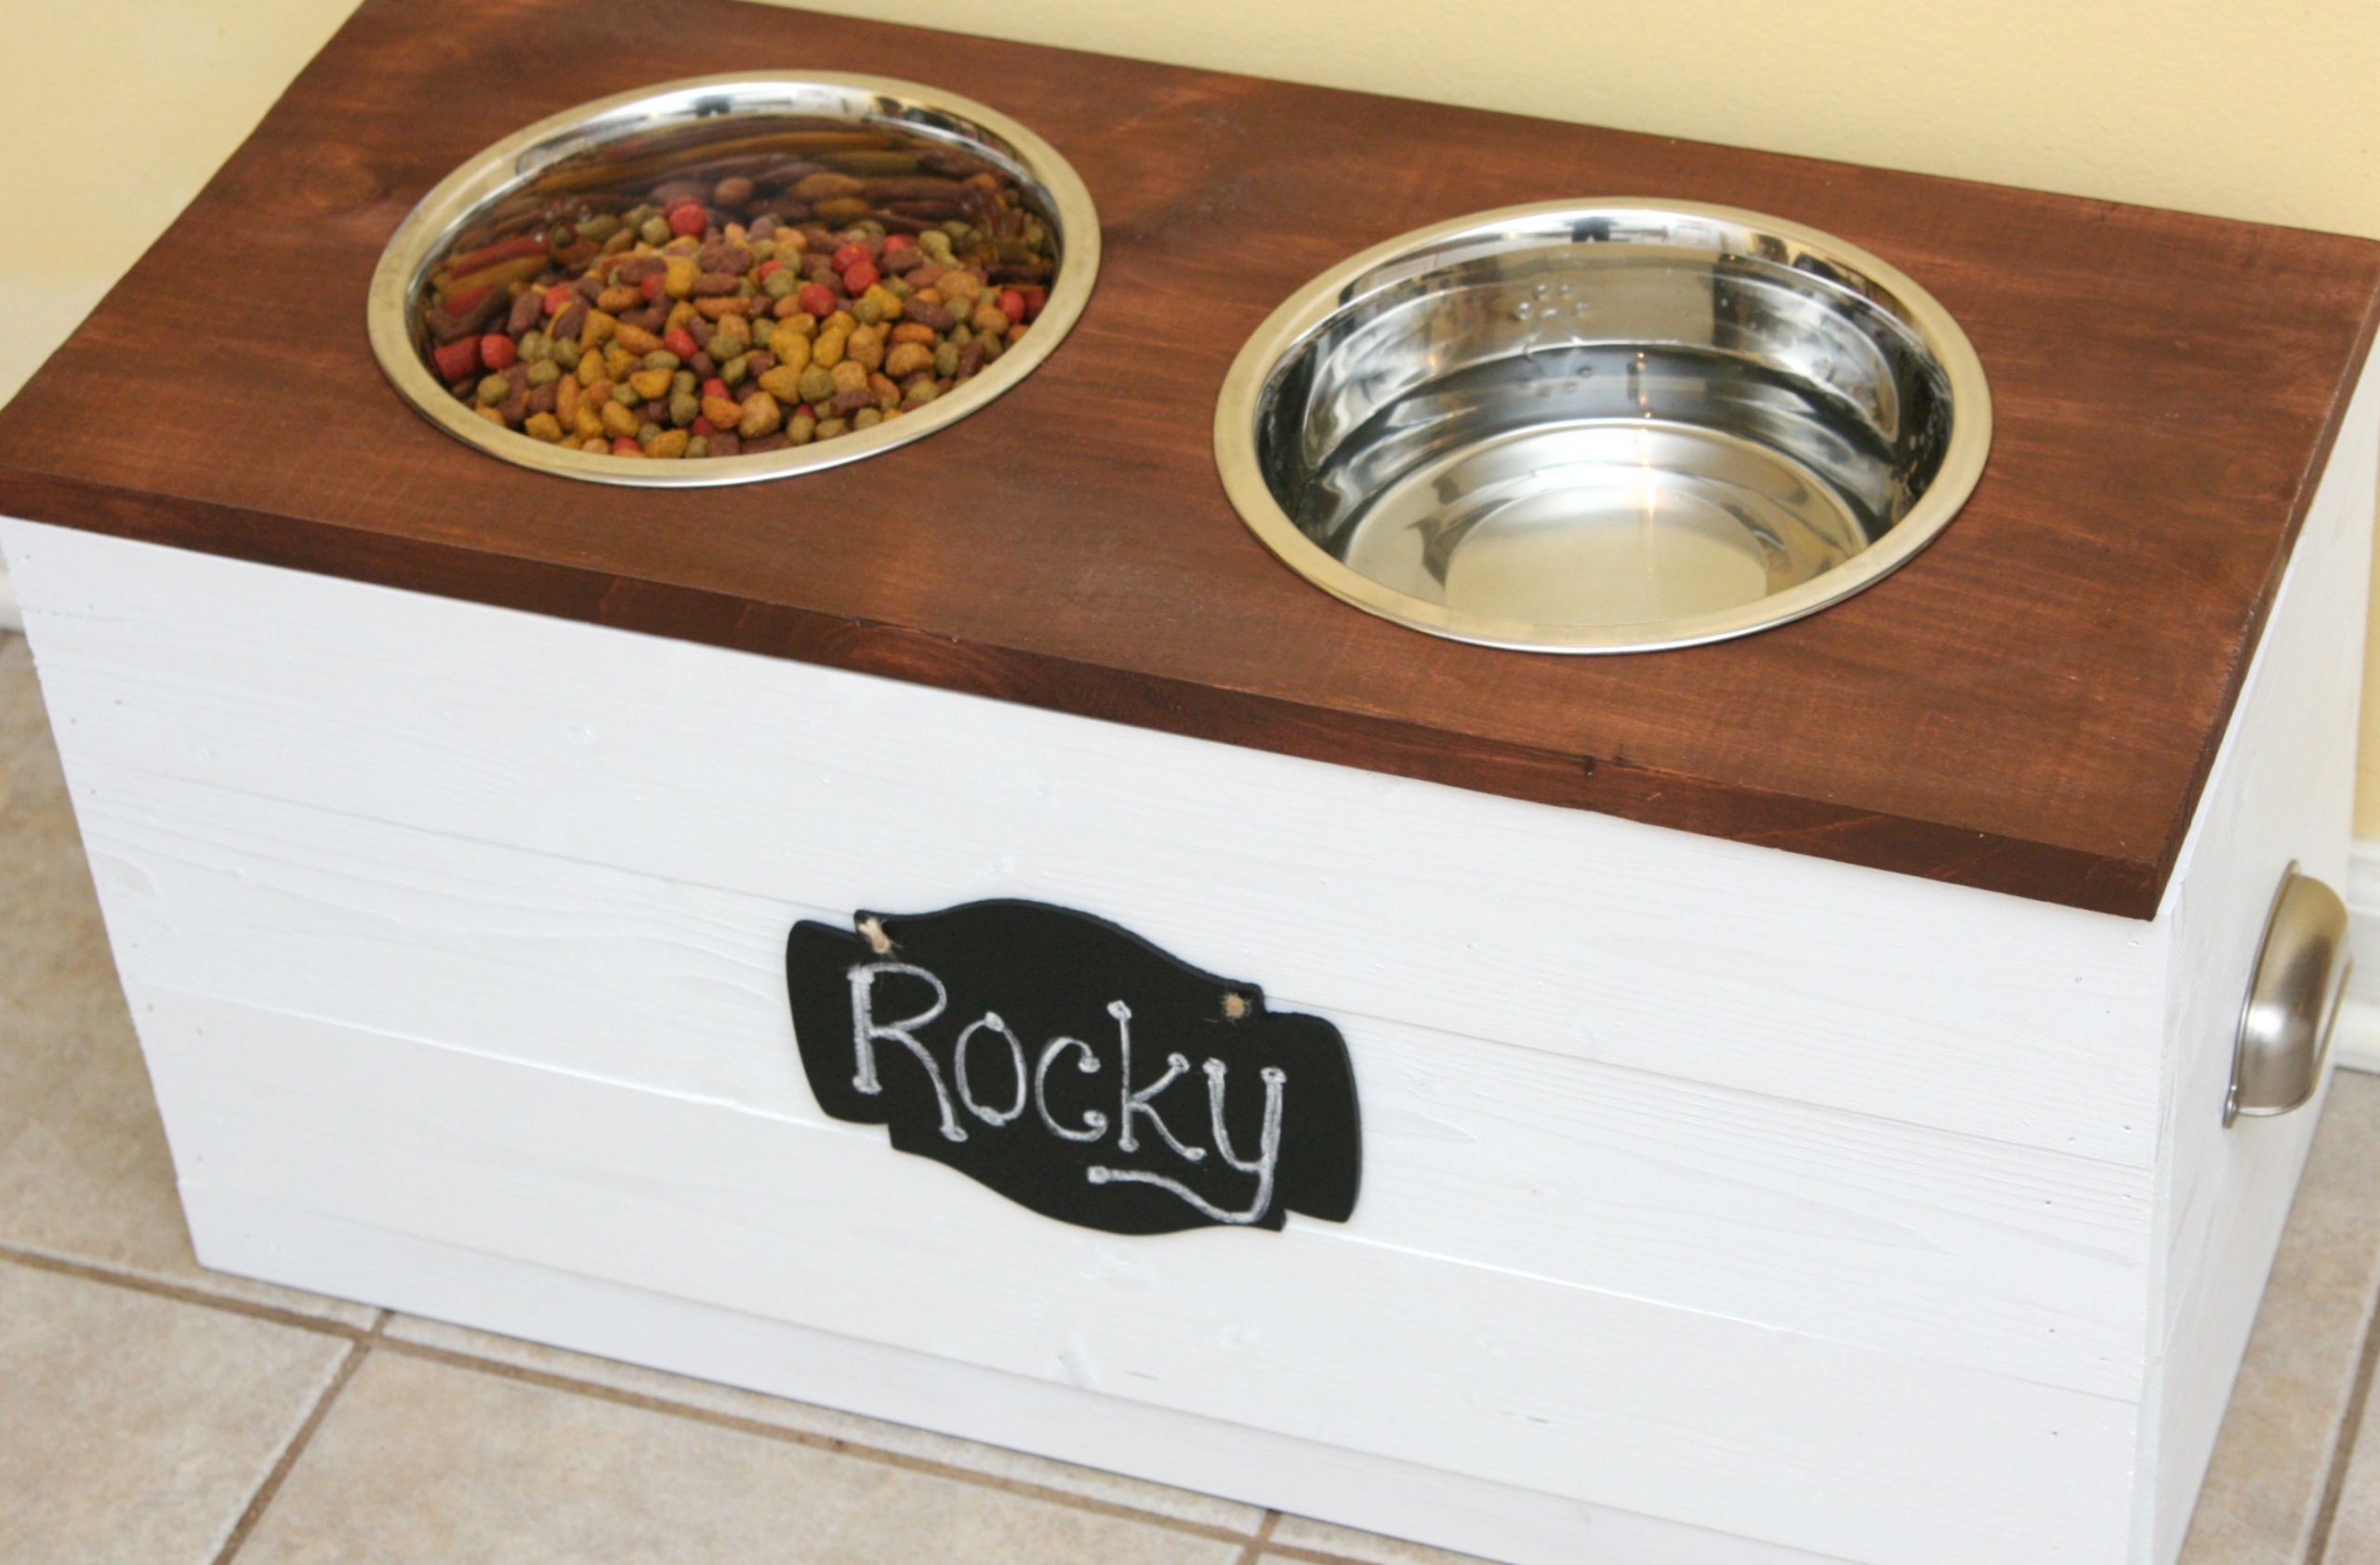 DIY Dog Bowl
 Don’t for to include doggy chic when designing your